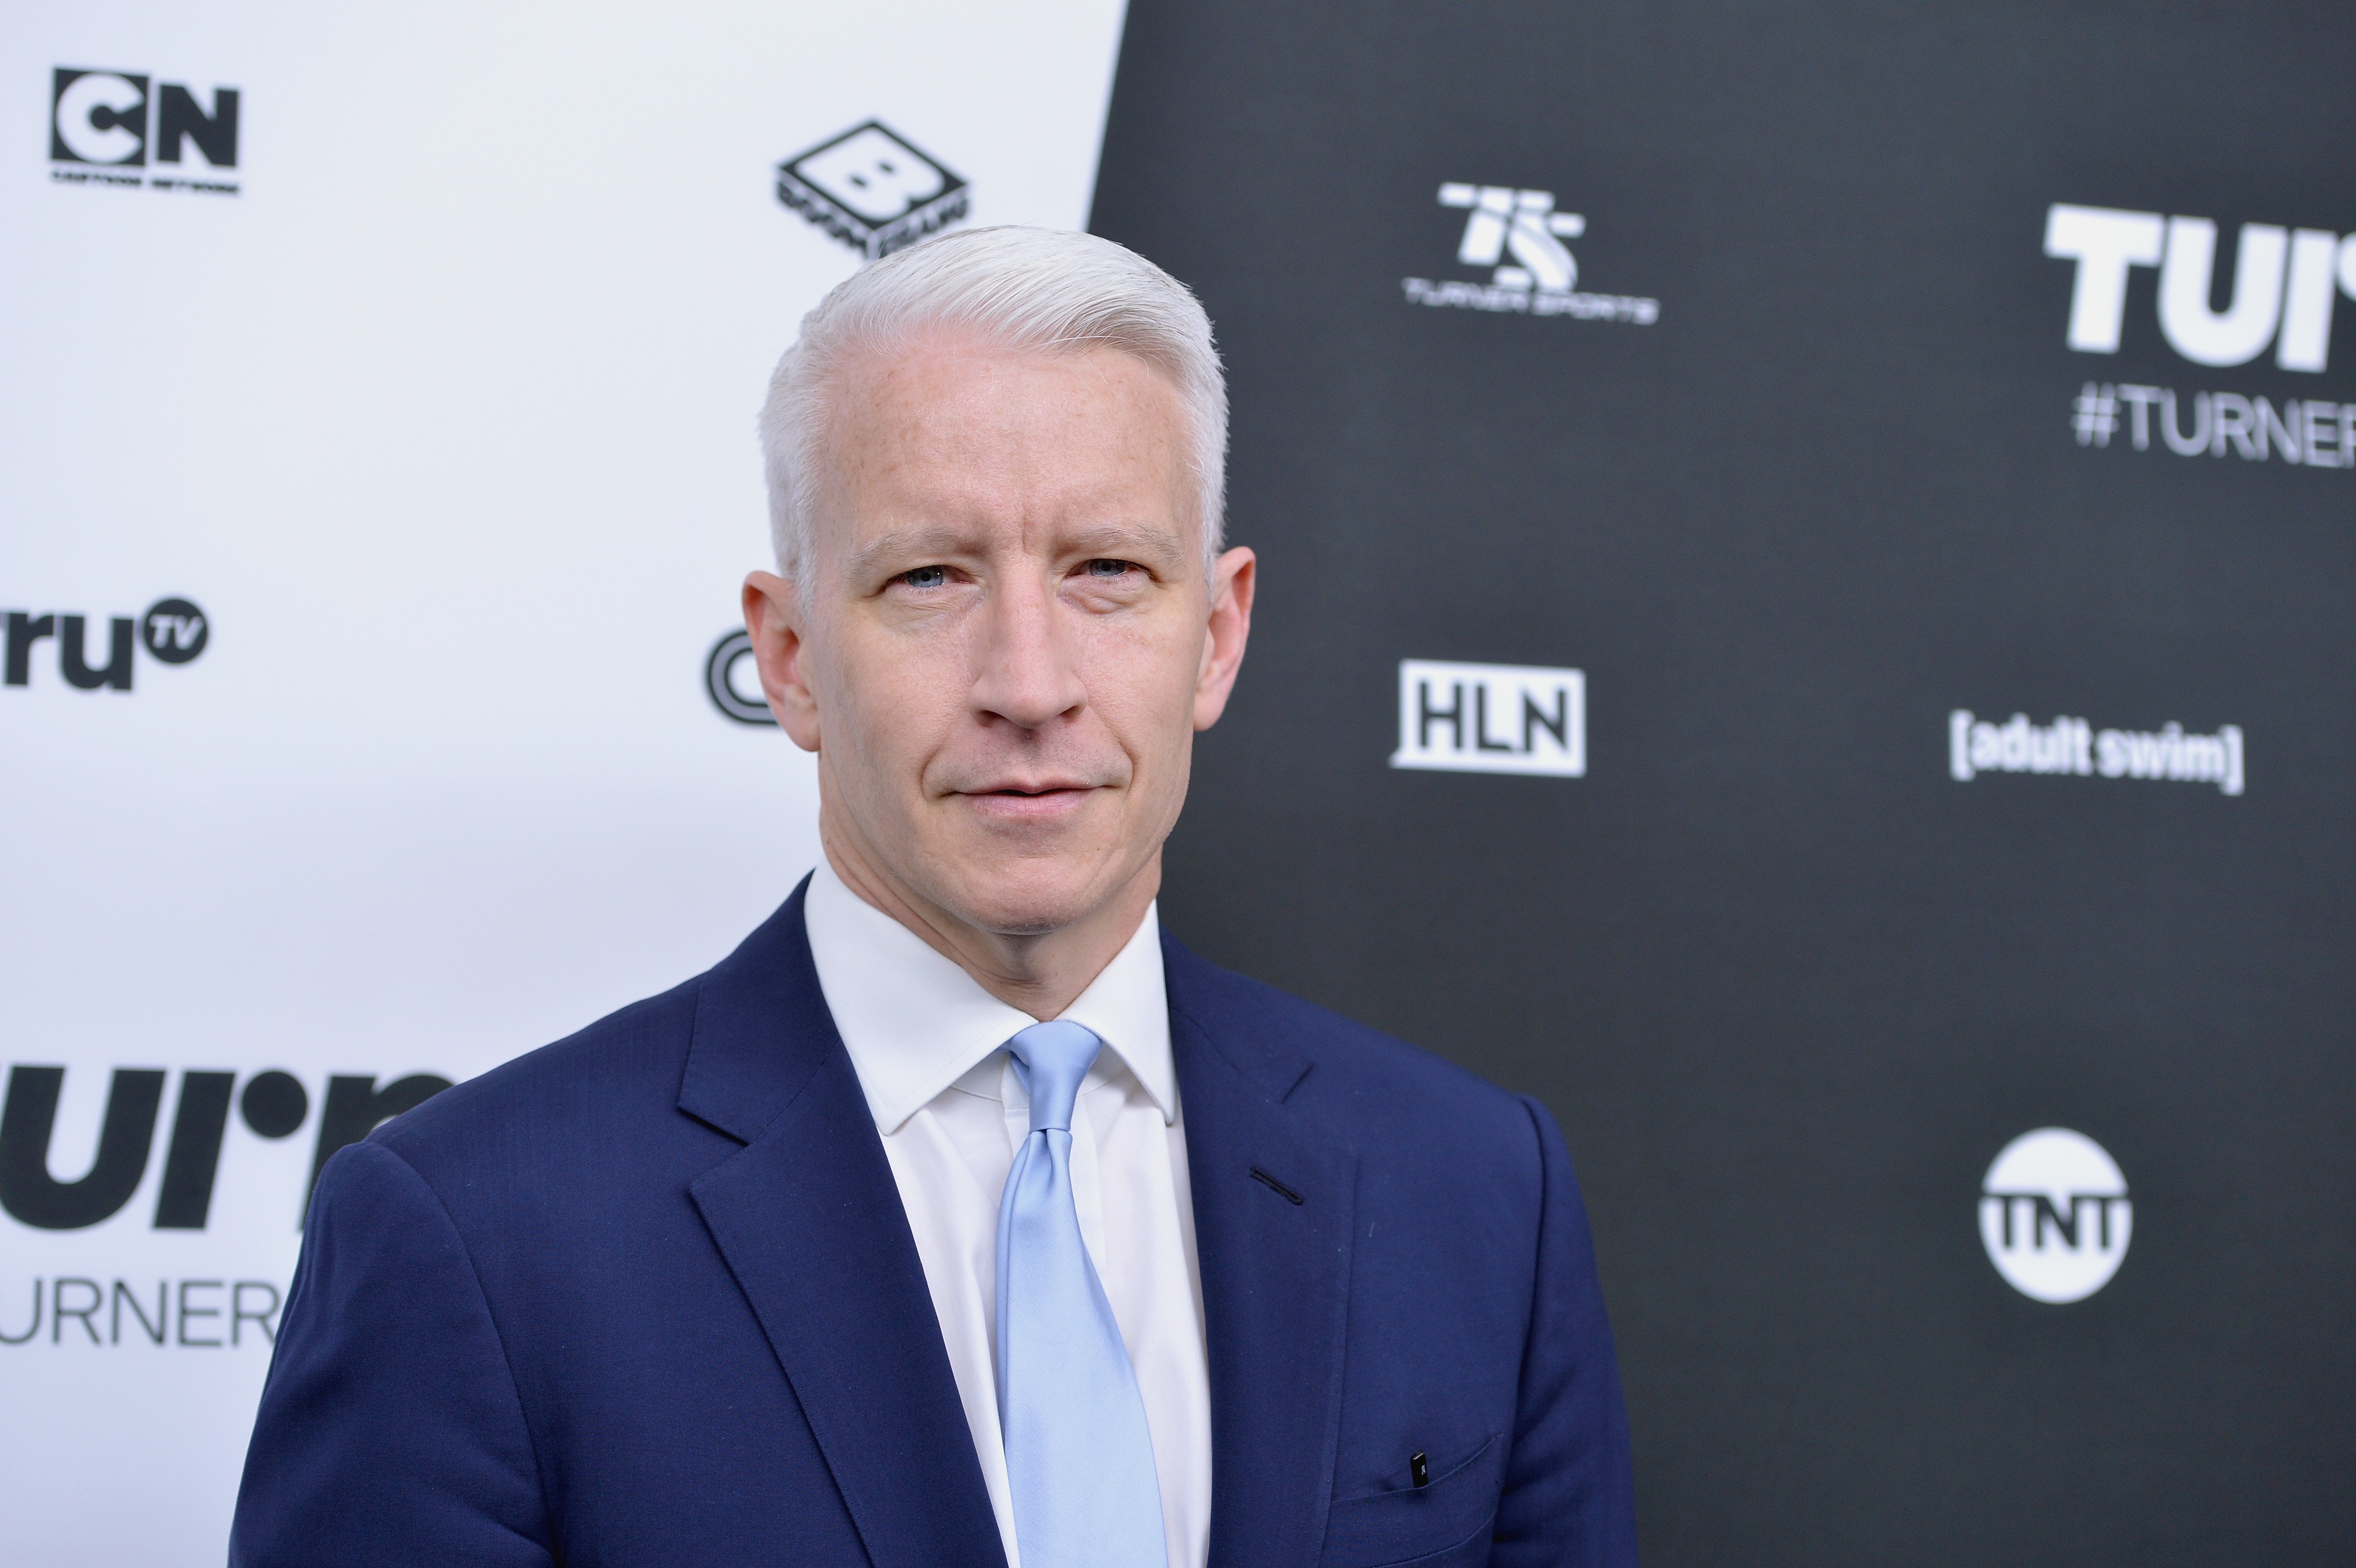 Journalist Anderson Cooper attends the Turner Upfront 2016 at Nick & Stef's Steakhouse on May 18, 2016 in New York City. | Source: Getty Images